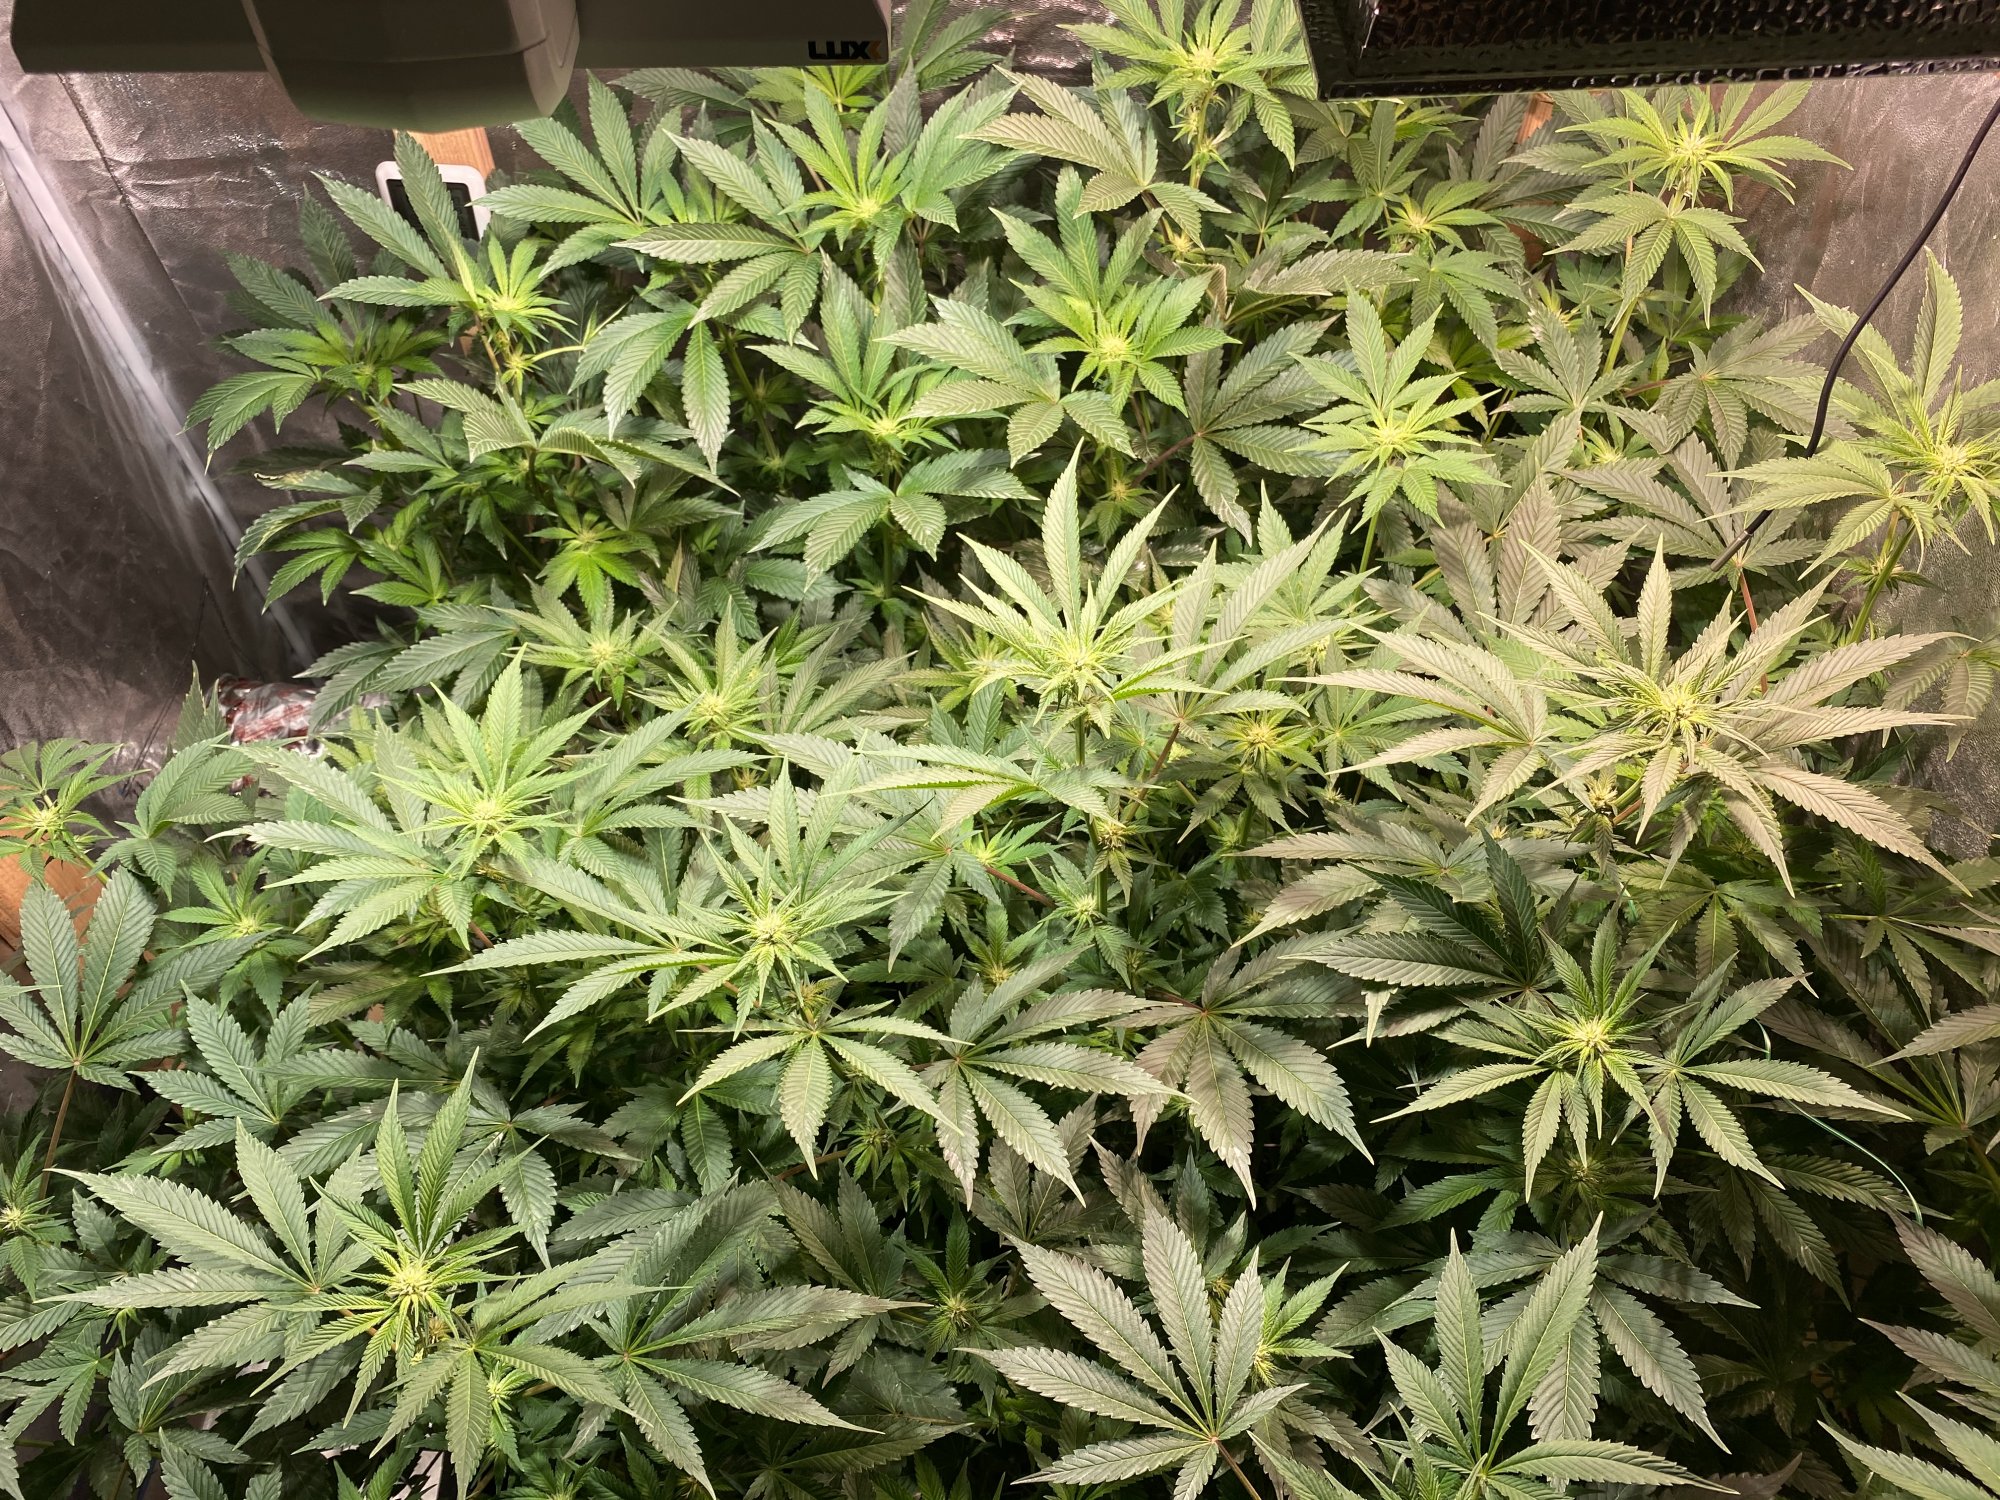 Would you defoliate these girls 2